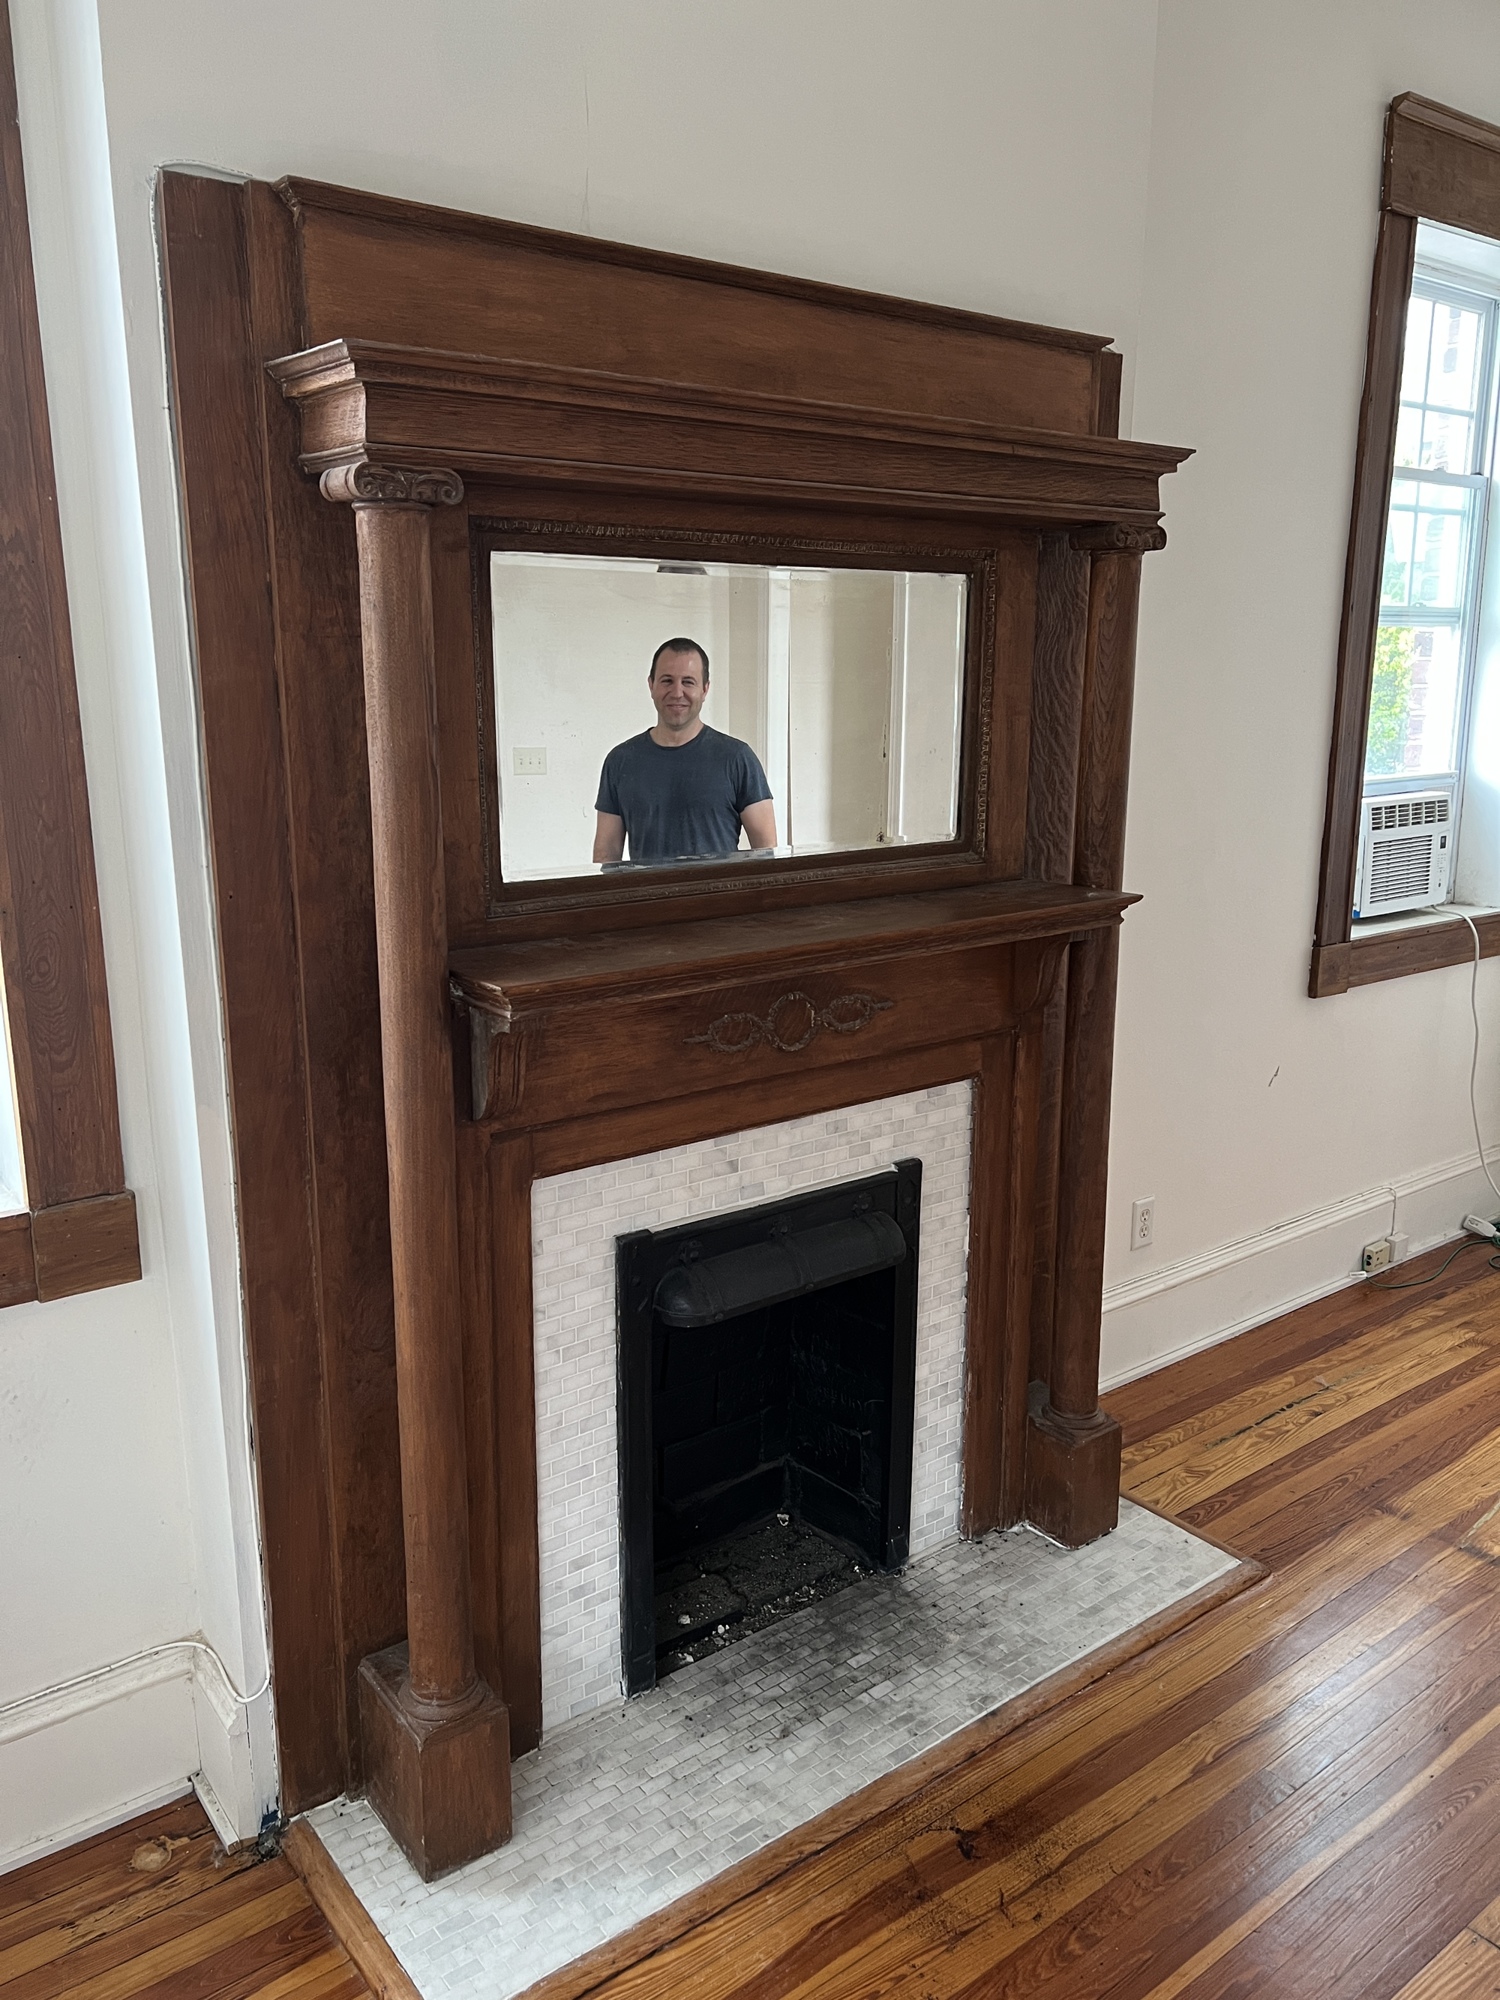 Eric Adler is reflected in the mirror over one of the funeral home's fireplaces.